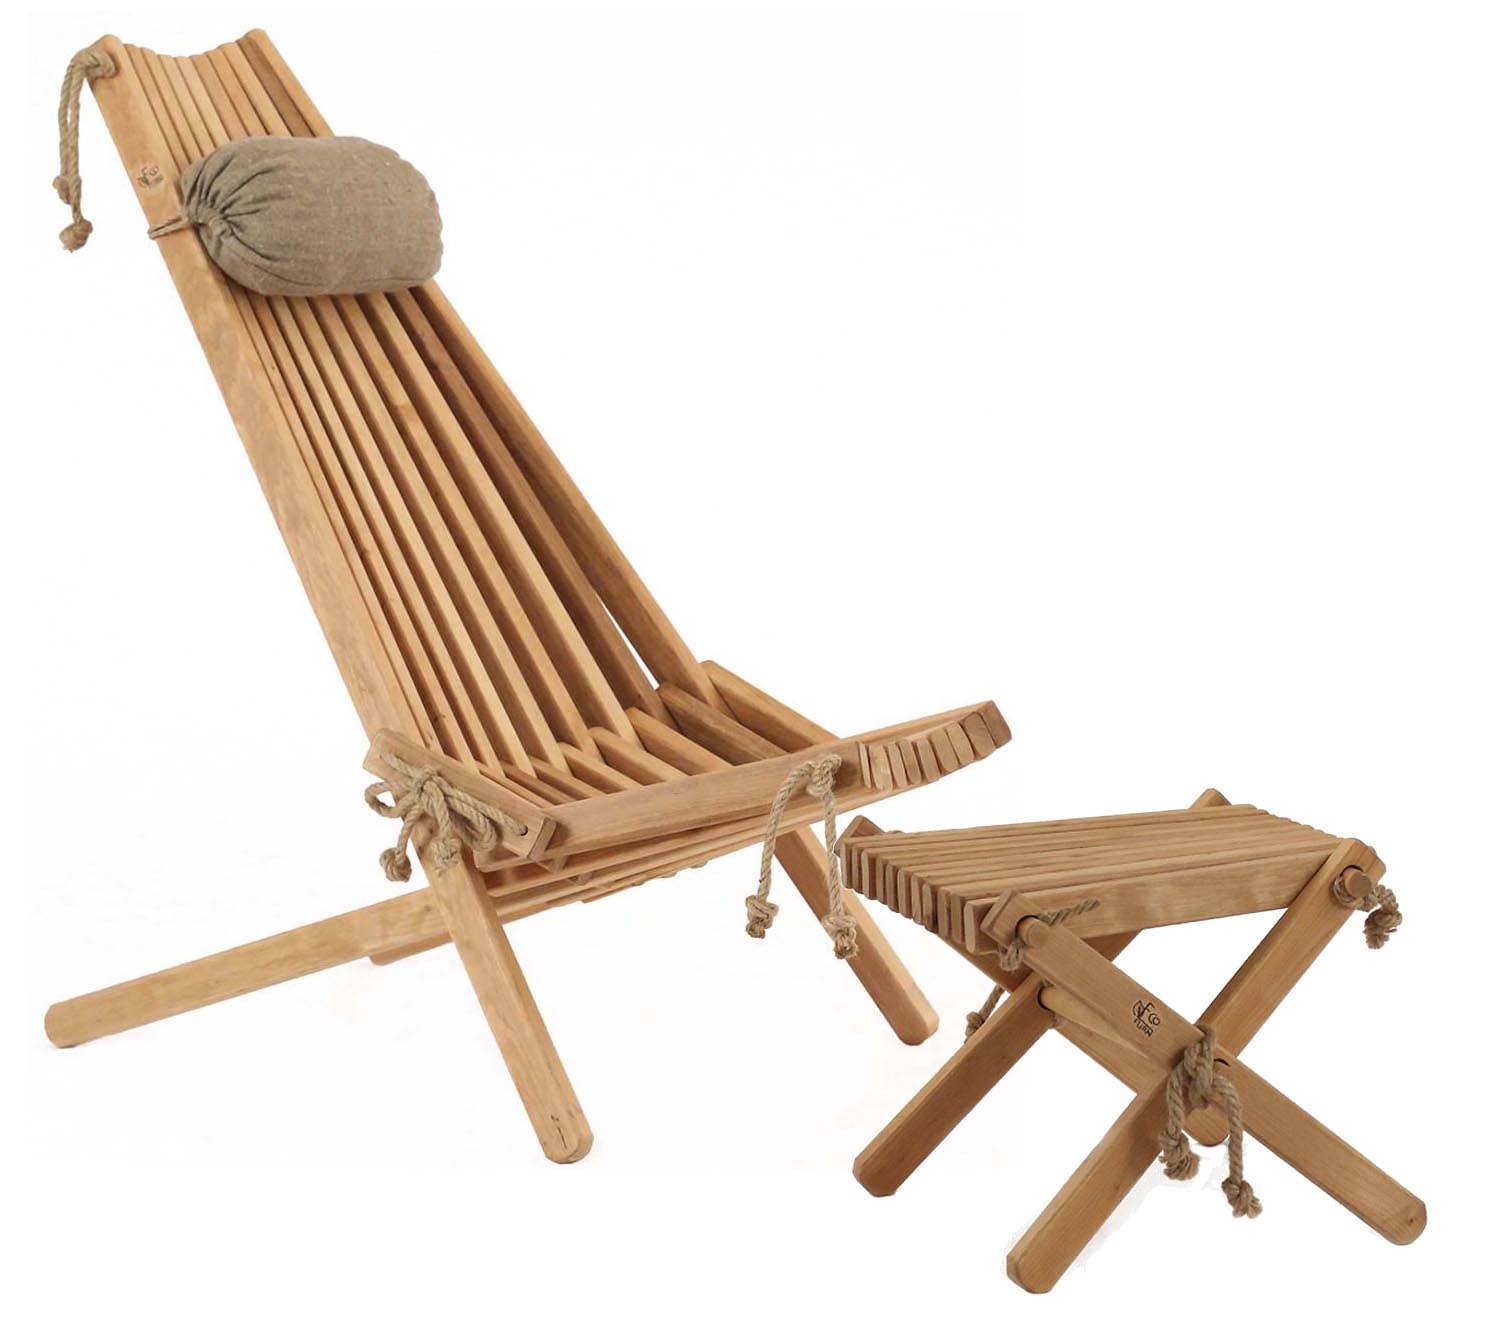 Chilienne scandinave avec repose-pieds aulne